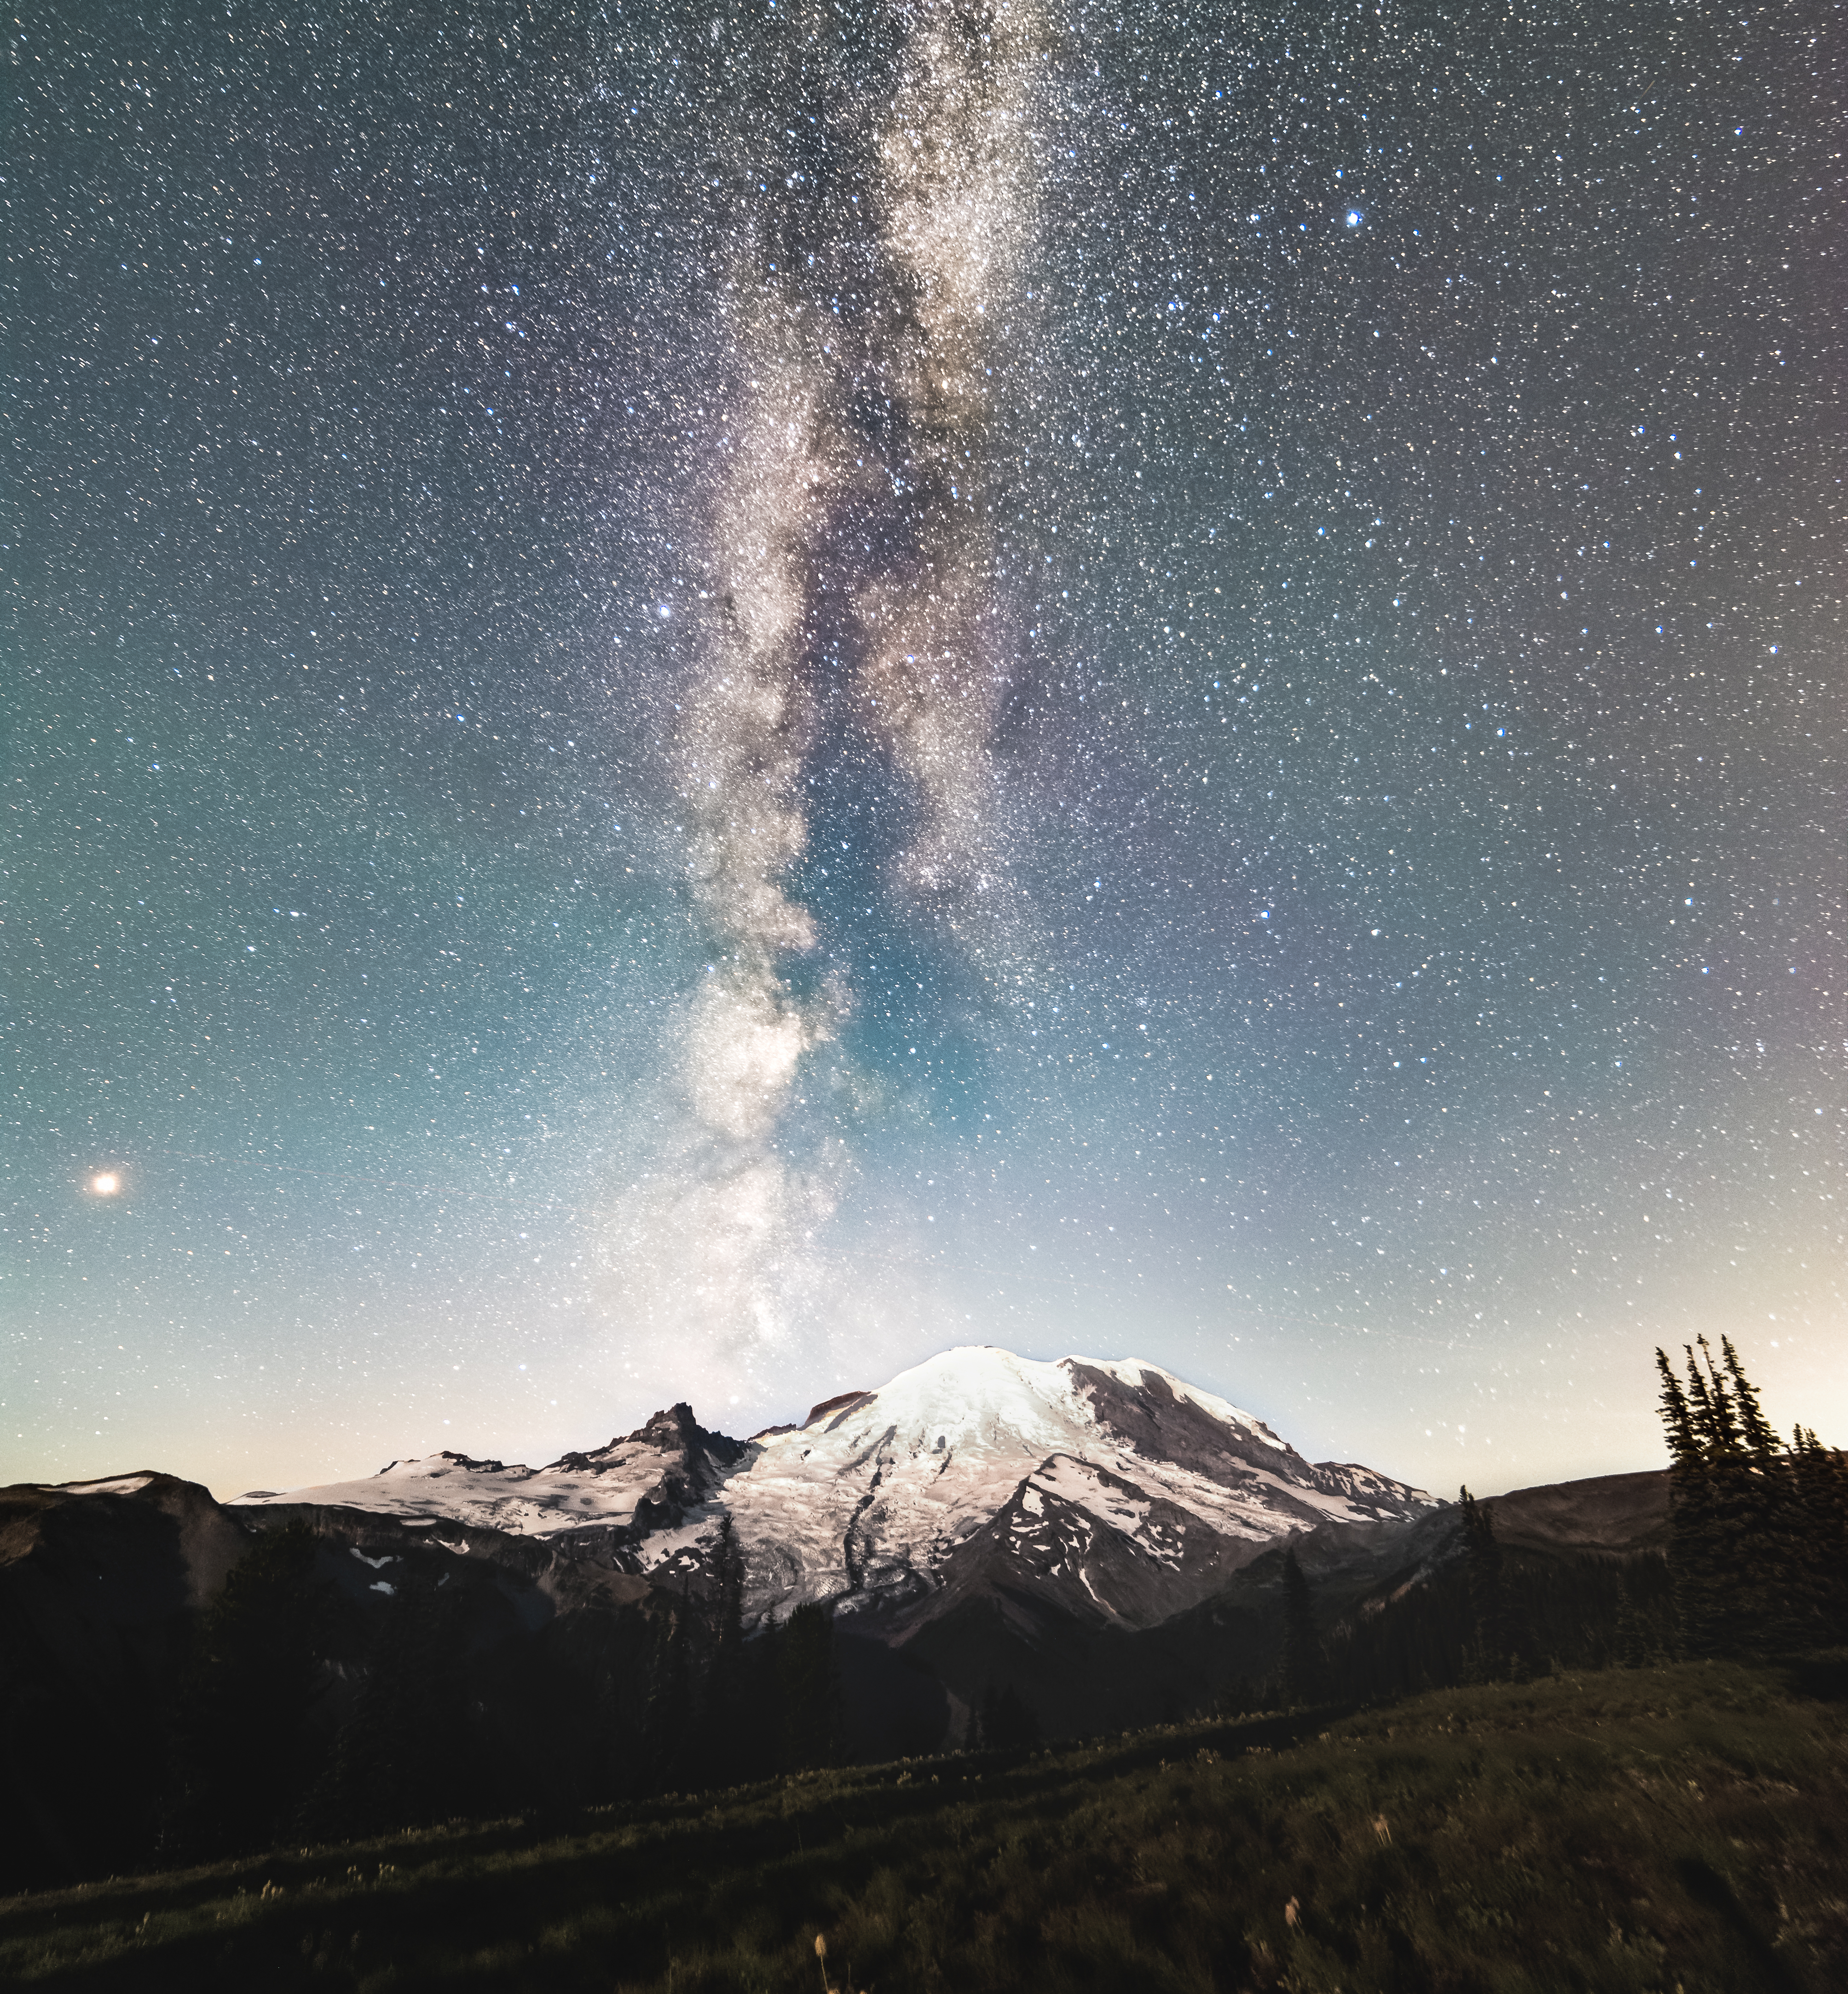 Stars are visible in the night sky over a mountain, with a dense, milky stretch of stars (the Milky Way) up the center.